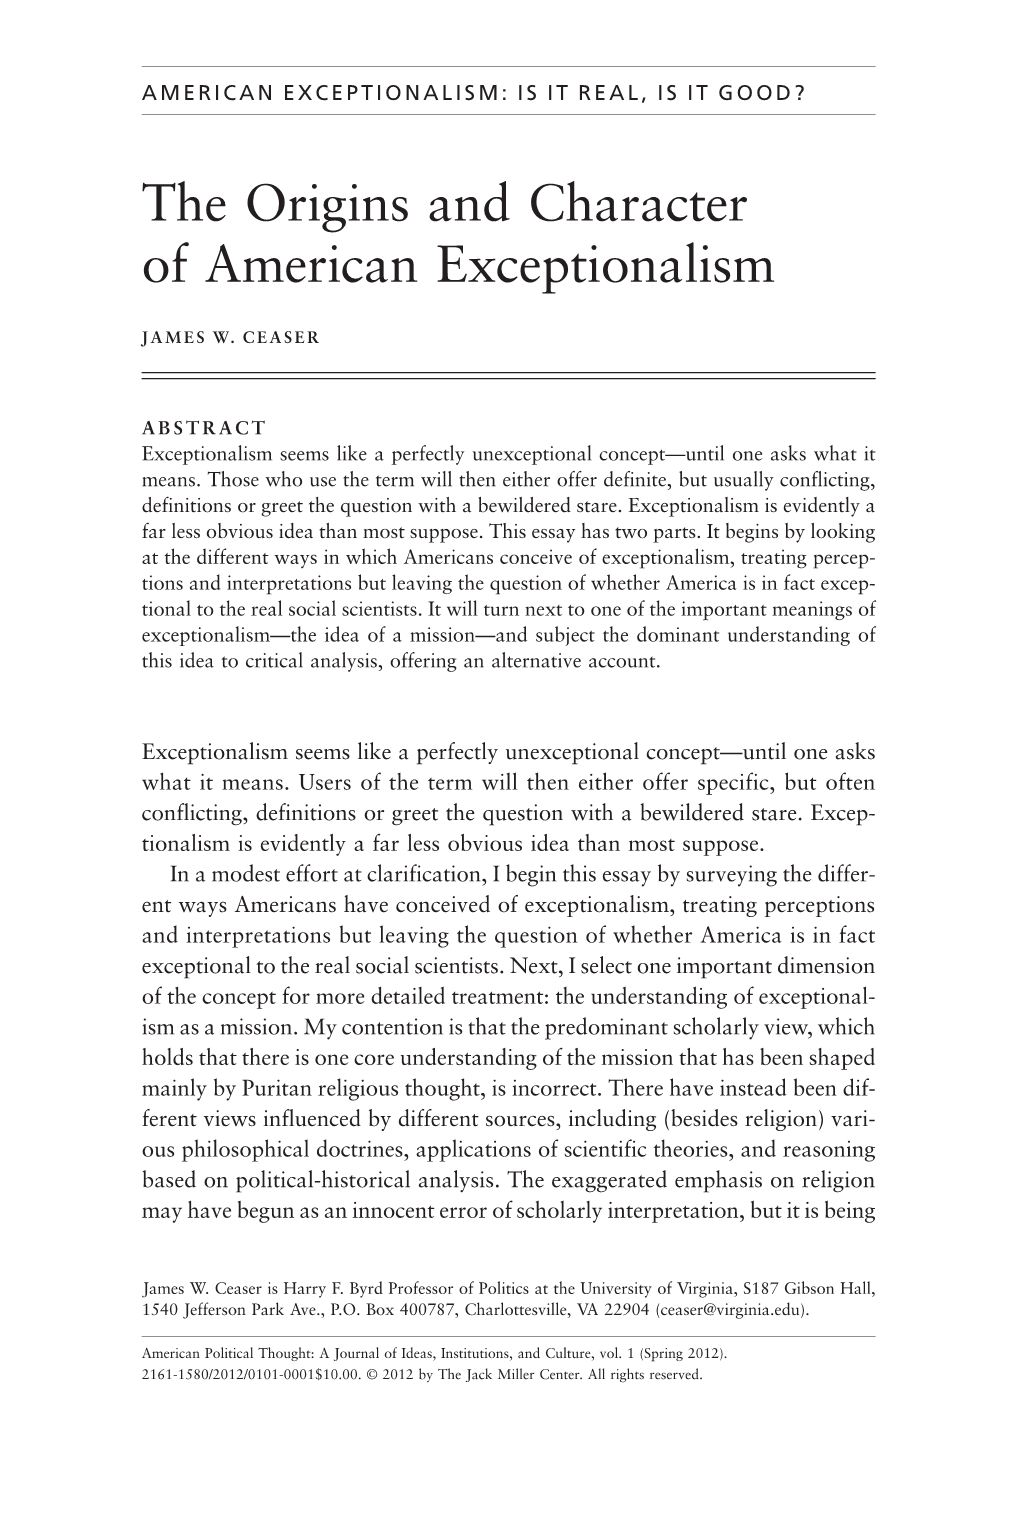 The Origins and Character of American Exceptionalism